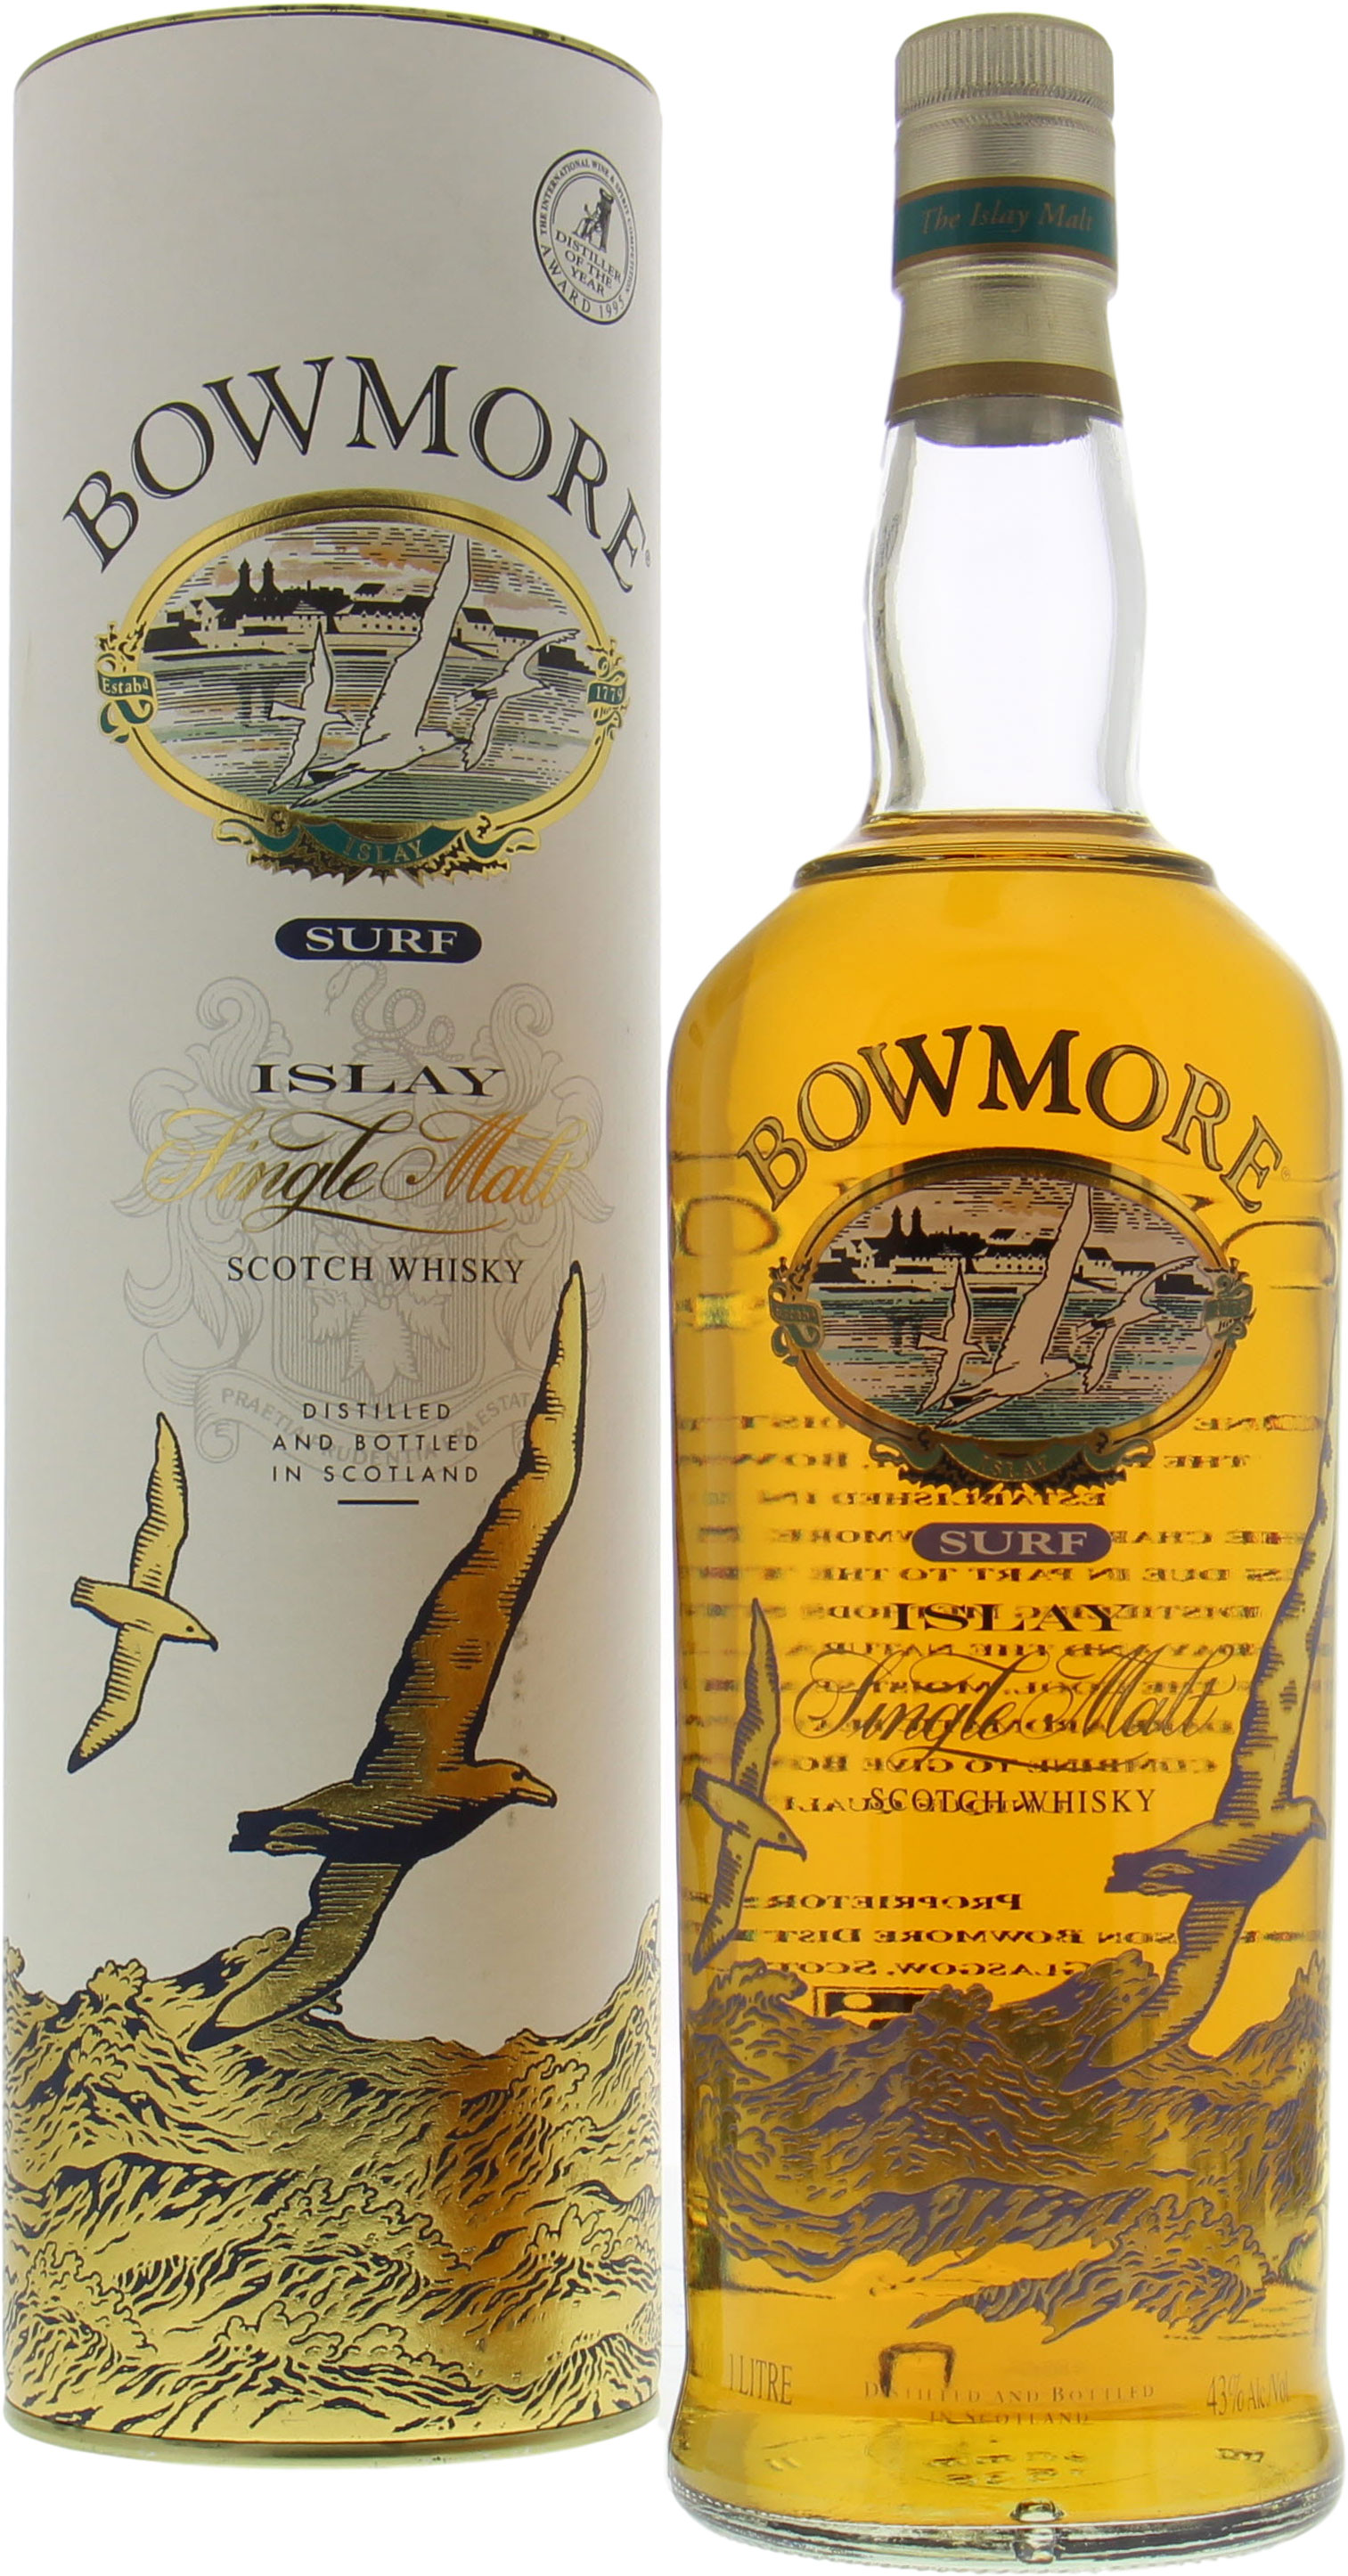 Bowmore - Surf Glass printed label with gulls and distillery 43% NV